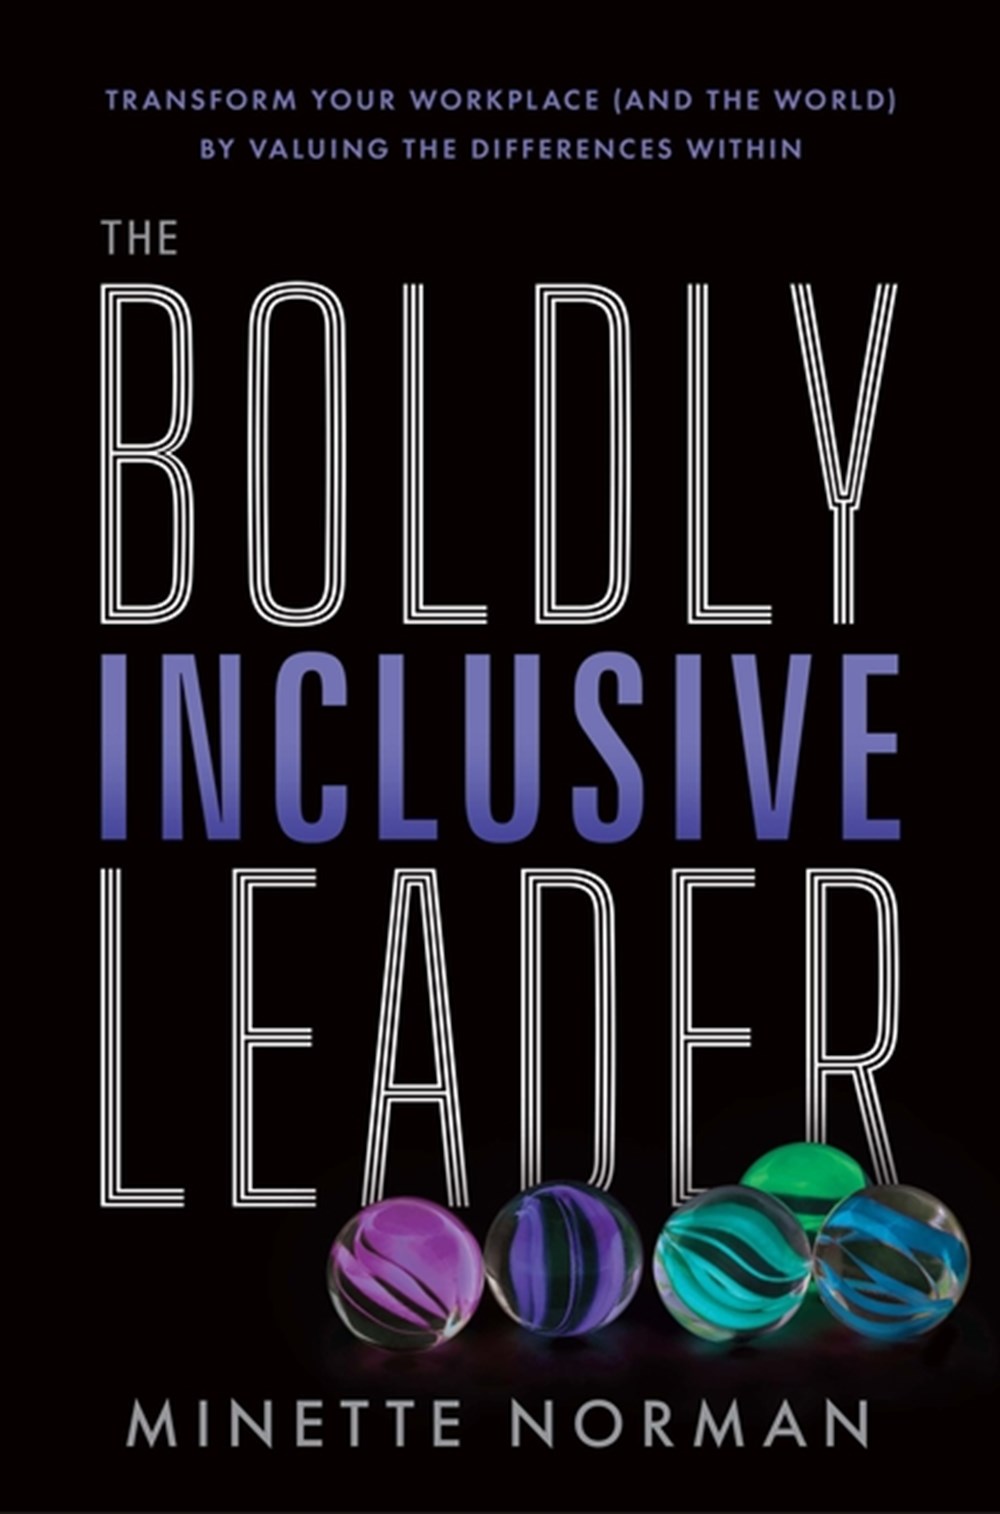 Boldly Inclusive Leader: Transform Your Workplace (and the World) by Valuing the Differences Within